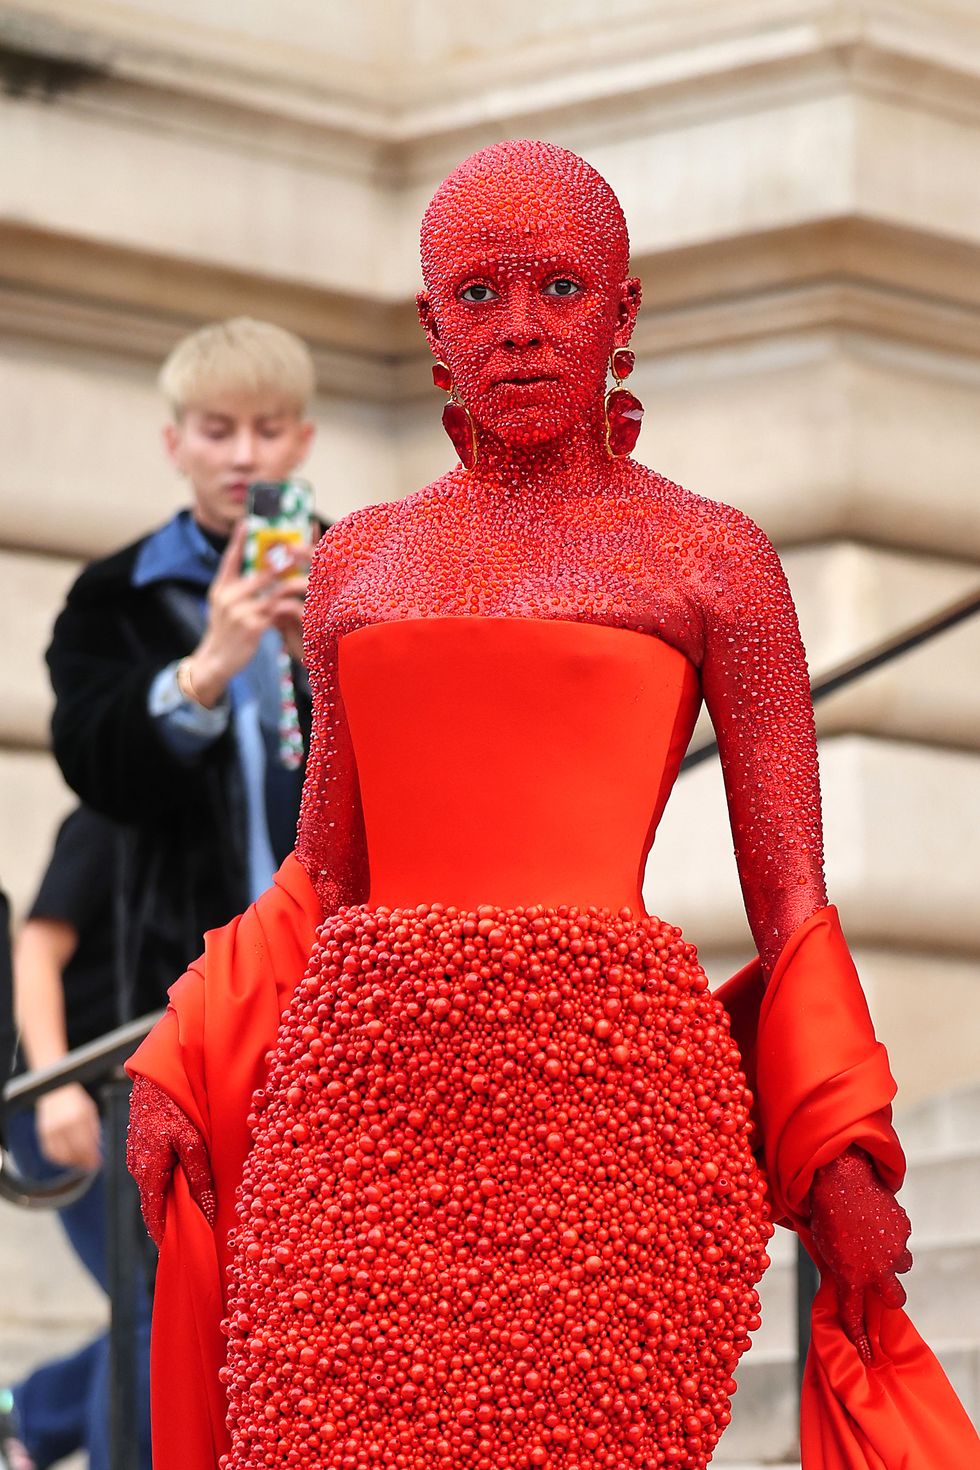 Doja Cat covered herself in red body paint and 30,000 crystals for